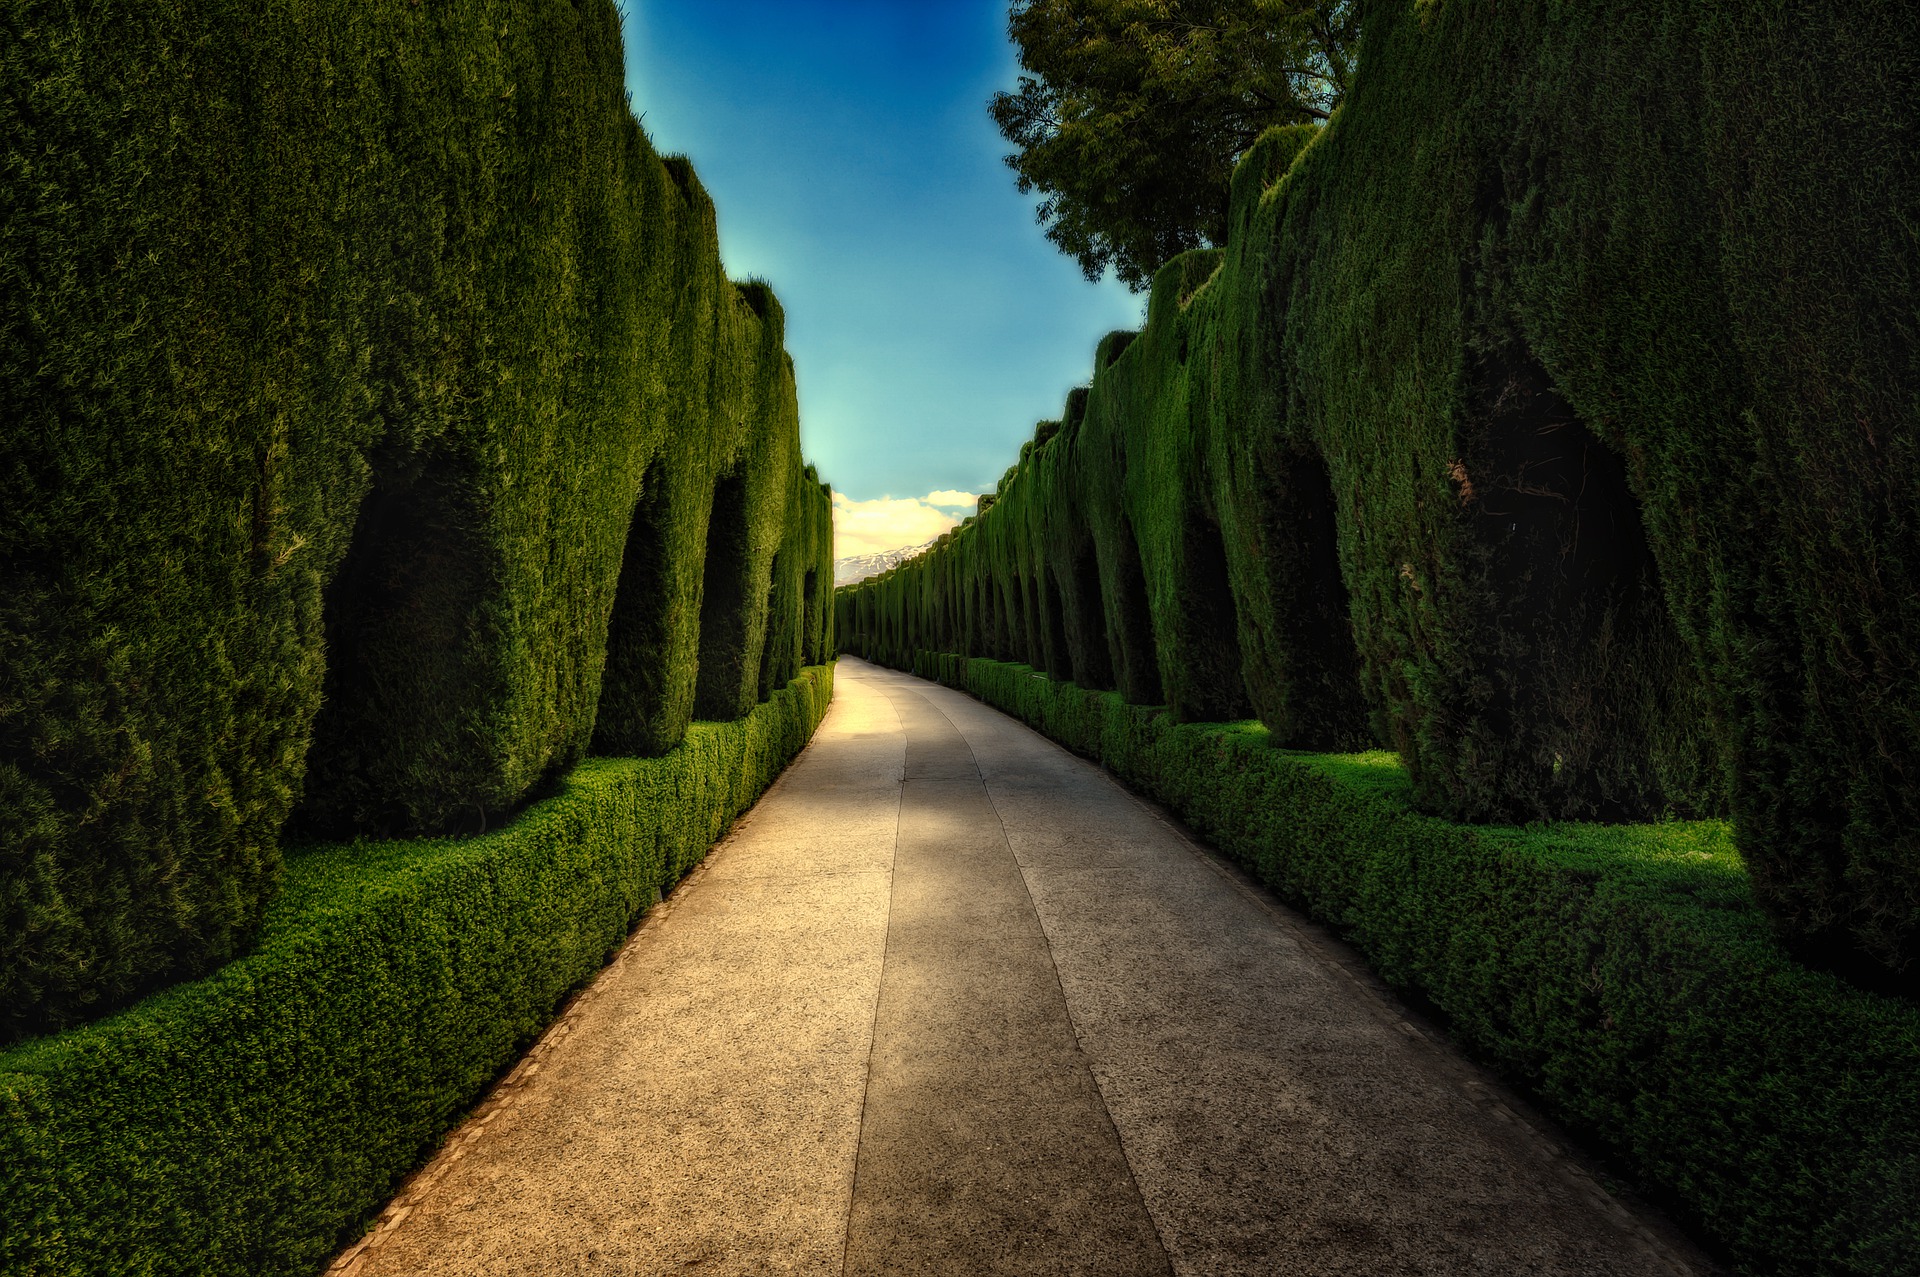 Landscaping with arborvitae shrubs yields gorgeous results like this pathway and hedge combination.